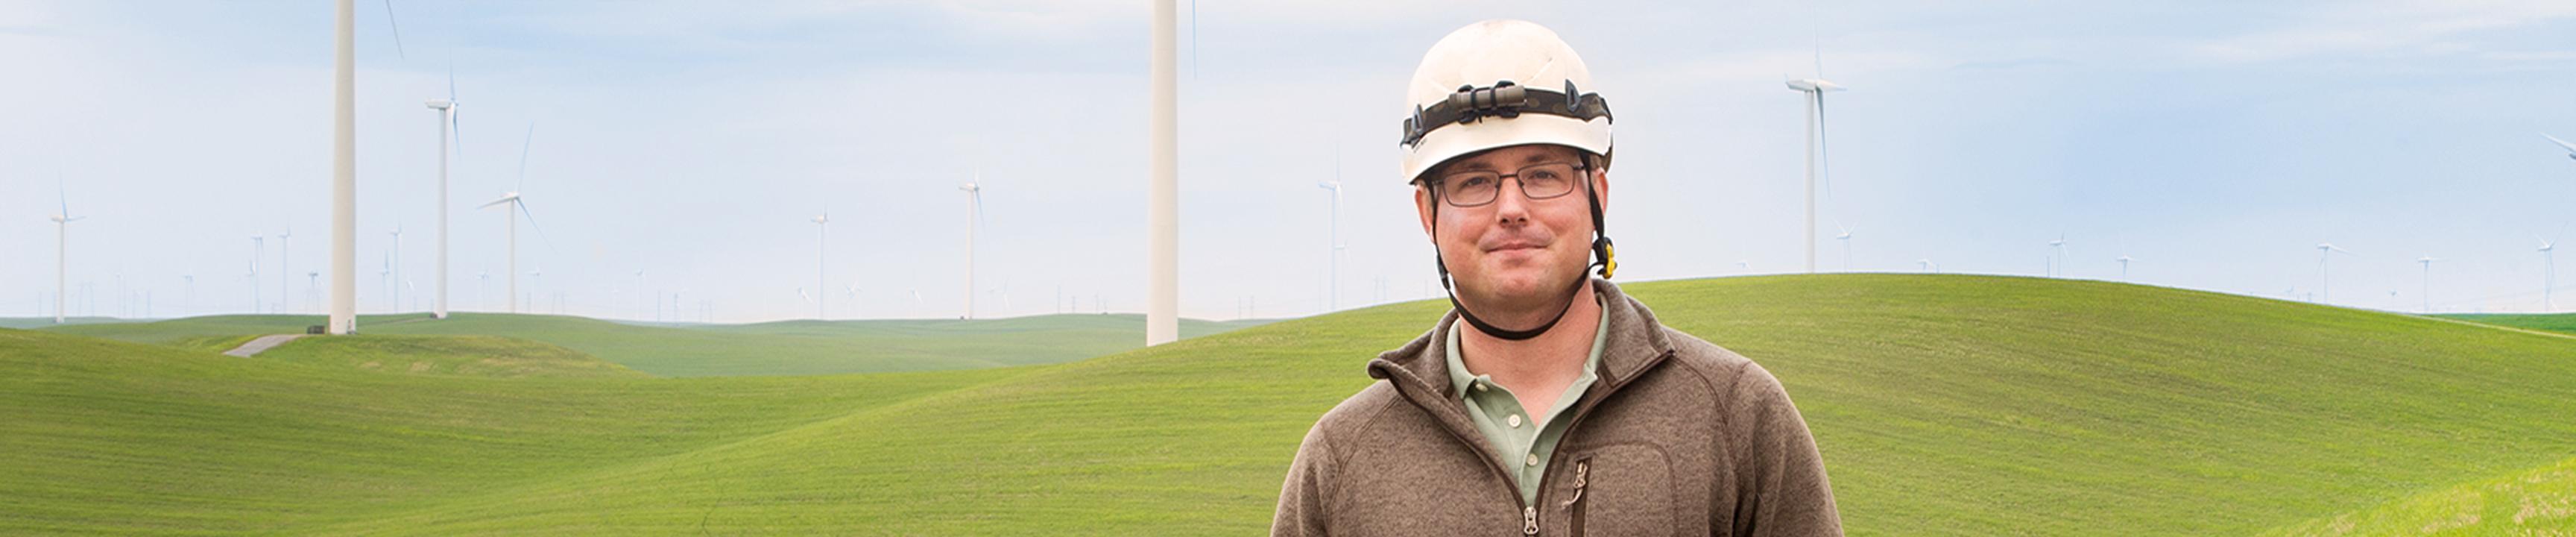 SFPUC worker at Bay Area wind farm